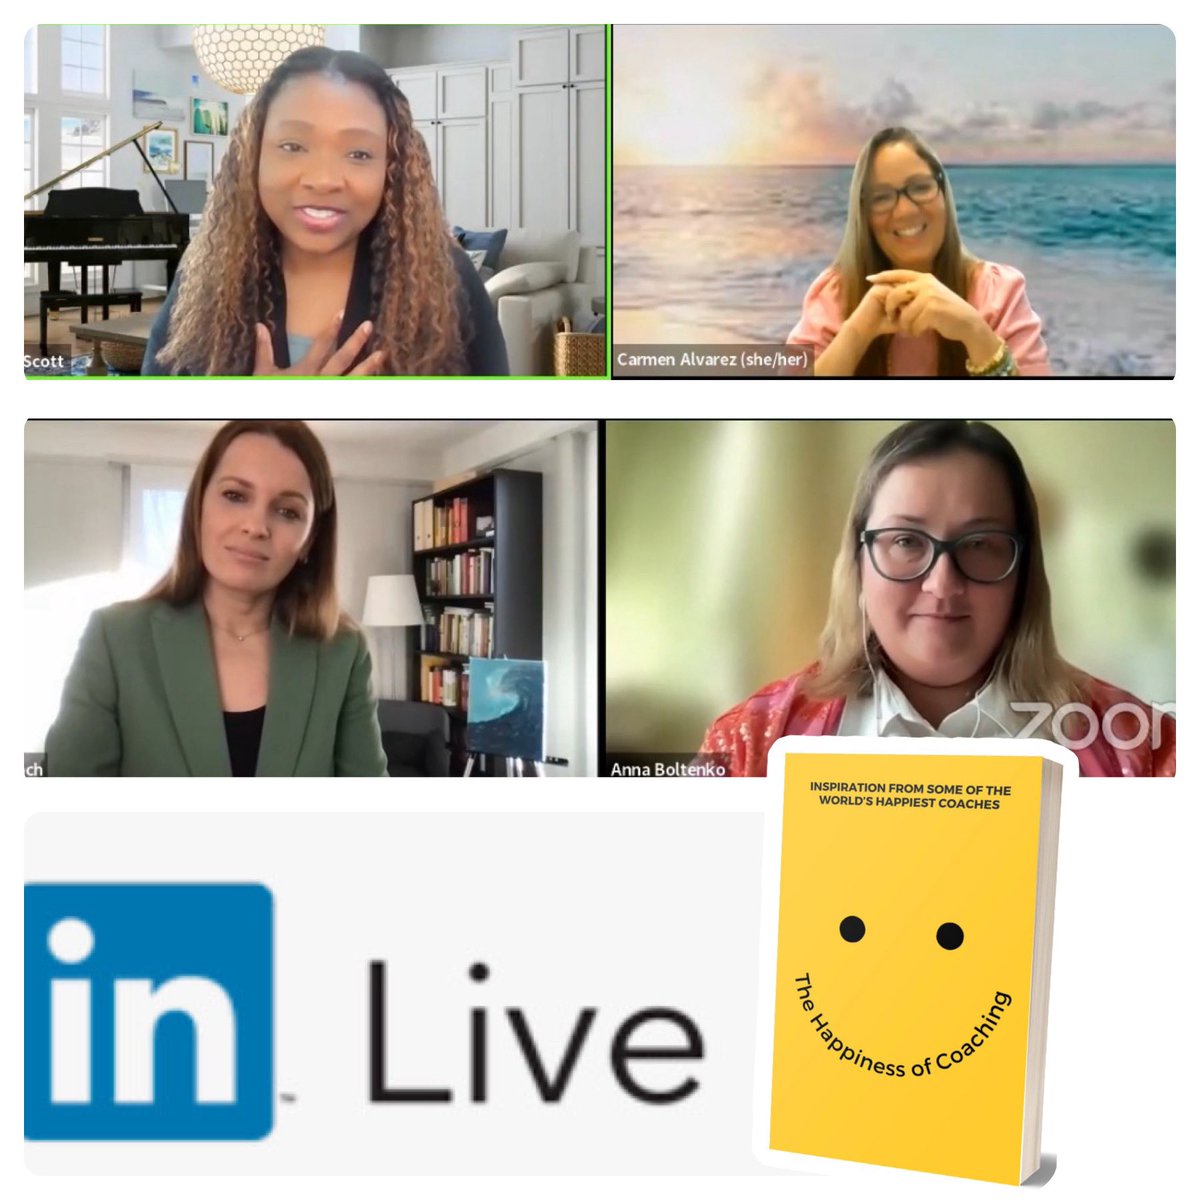 Honored to be interviewed by Dr. Cree Scott about my book “Happiness of Coaching”along two of the other co-authors. This is a collaboration of 19 women coming together with a shared purpose. #WomensHistoryMonth2024 #Wellbeing